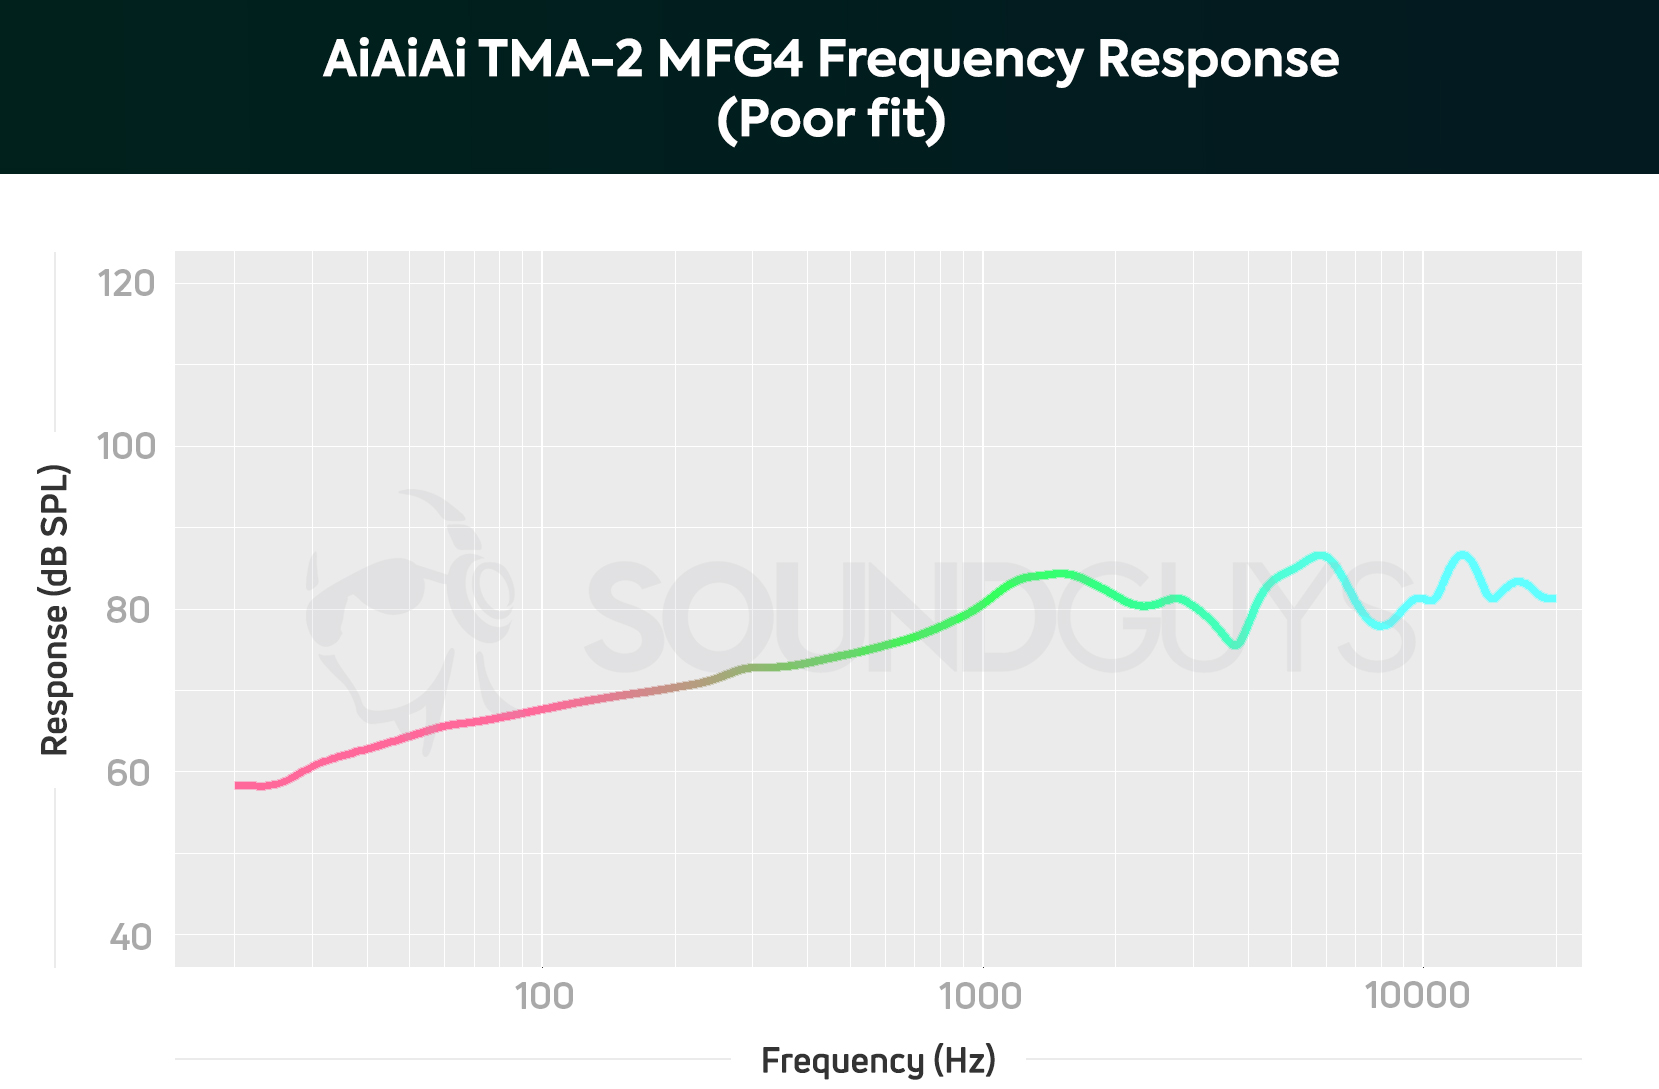 A chart showing the performance performance of the AiAiAi TMA-2 MFG4 with a poor fit.